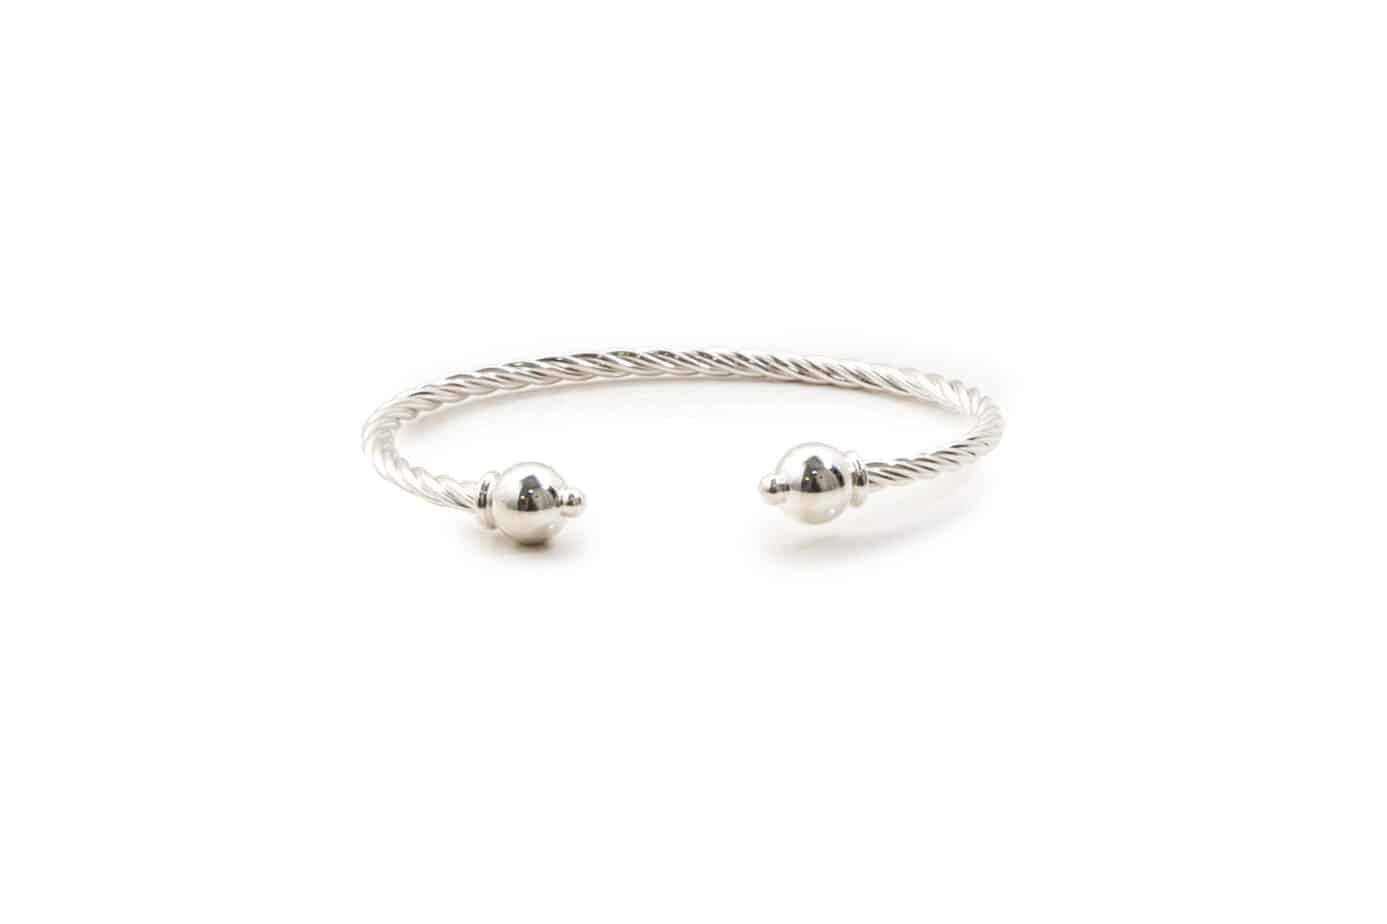 Sieraden Armbanden Bangles Cape Cod Twist bracelet made in Sterling Silver with a 14k Gold or Sterling Silver Ball. 